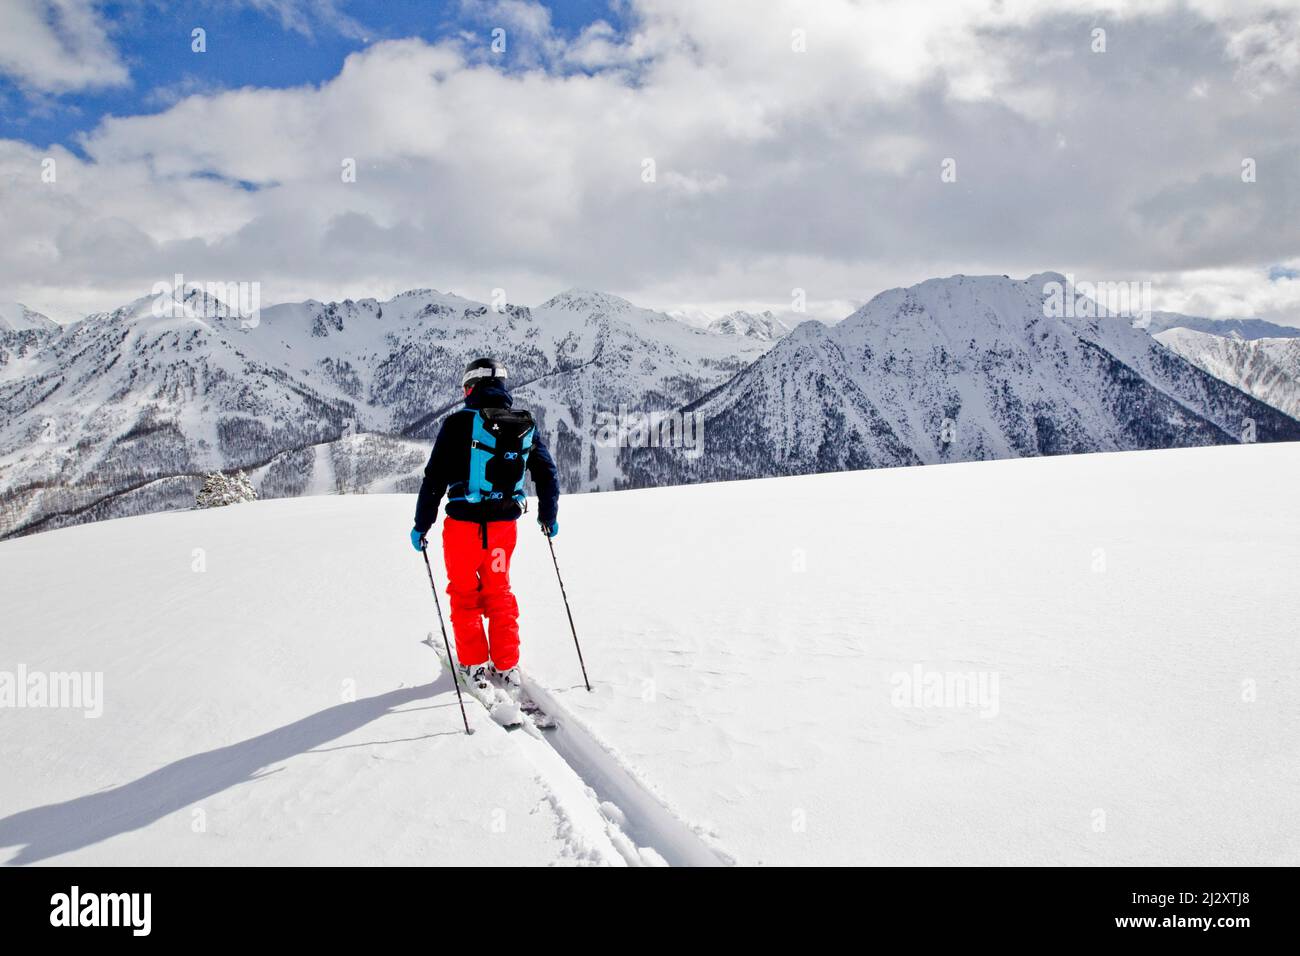 Ski resort of Montgenevre (French Alp, south-eastern France): man, freeride skier skiing in powder snow, off-piste skiing, backcountry skiing and trac Stock Photo